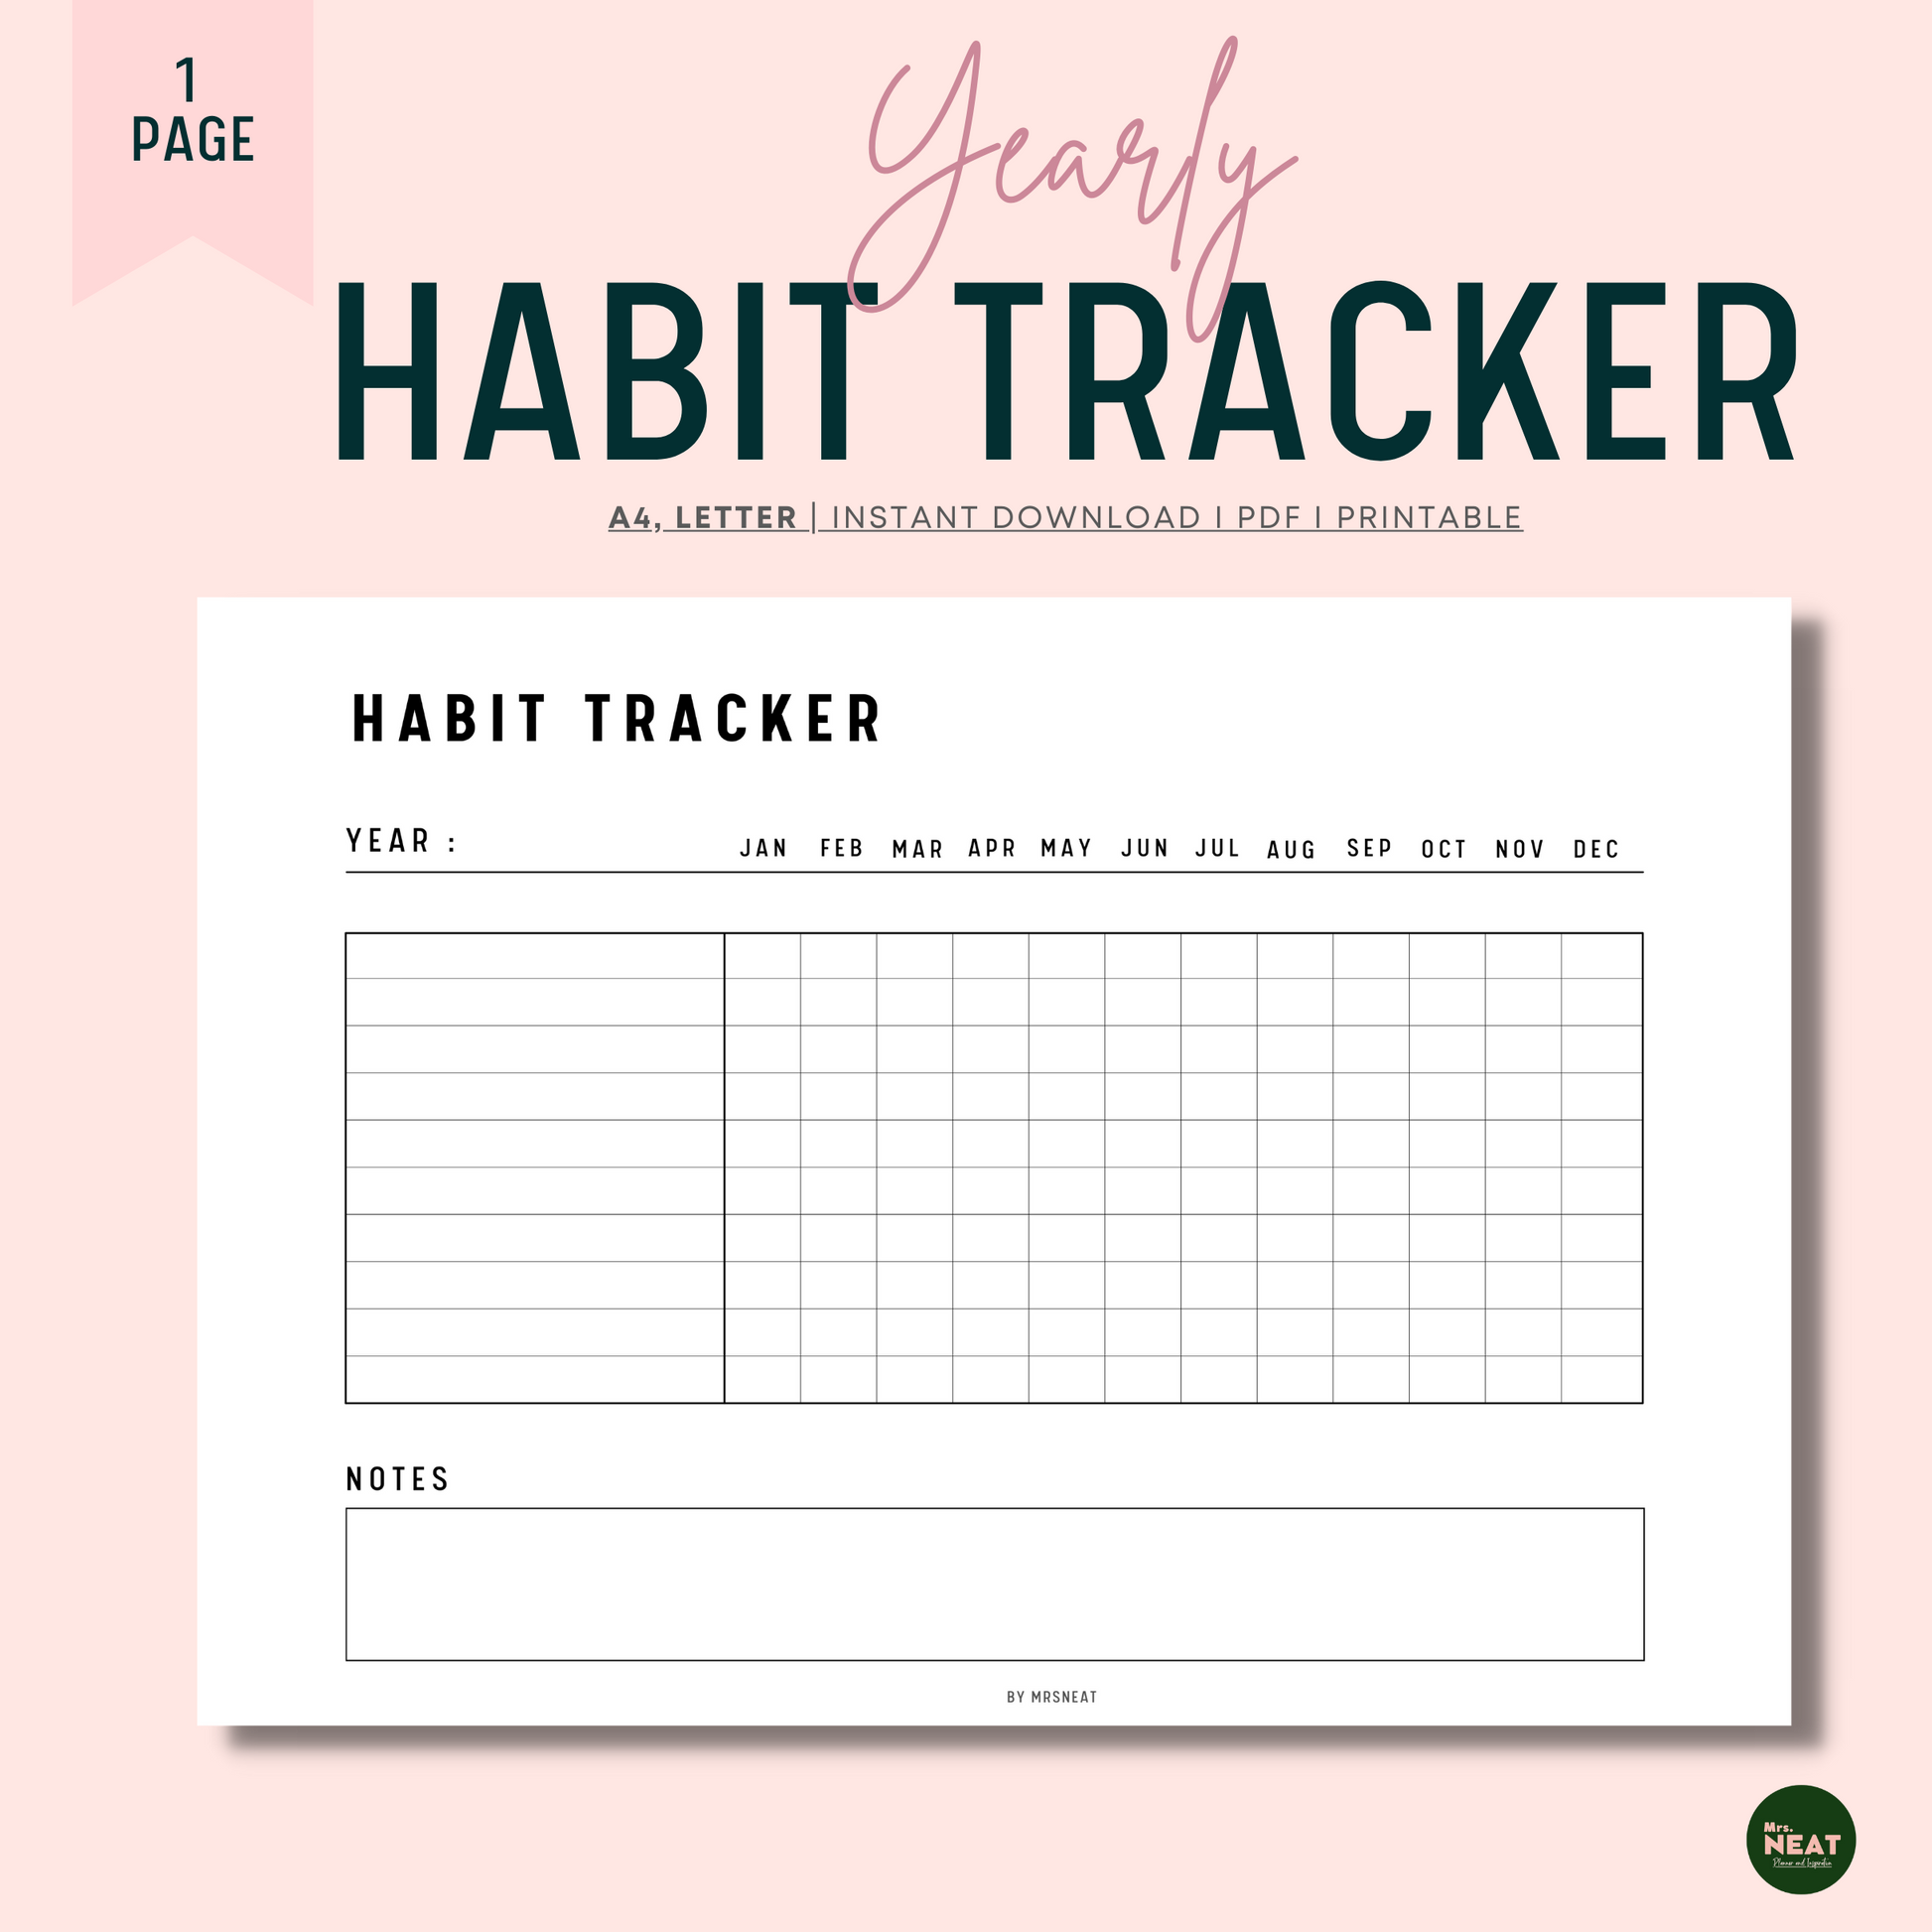 Clean and Minimalist Yearly Horizontal Habit Tracker with undated year, 12 months, room for notes and habits